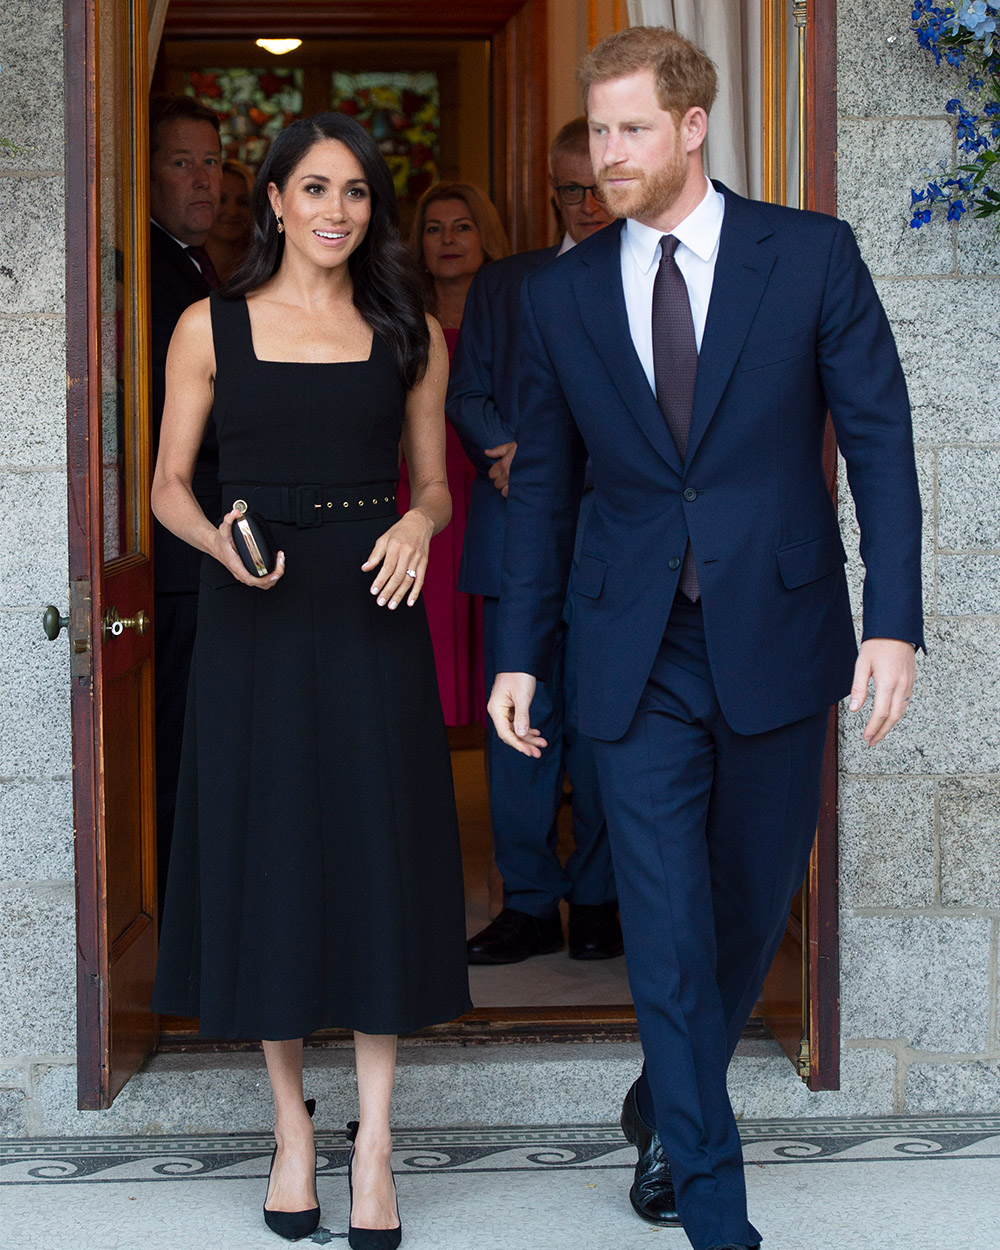 July 10, 2018: Meghan, Duchess of Sussex, wears a sophisticated LBD by New Zealand-born designer Emilia Wickstead during her Royal Tour of Ireland, and we think it’s one of her best looks yet. 